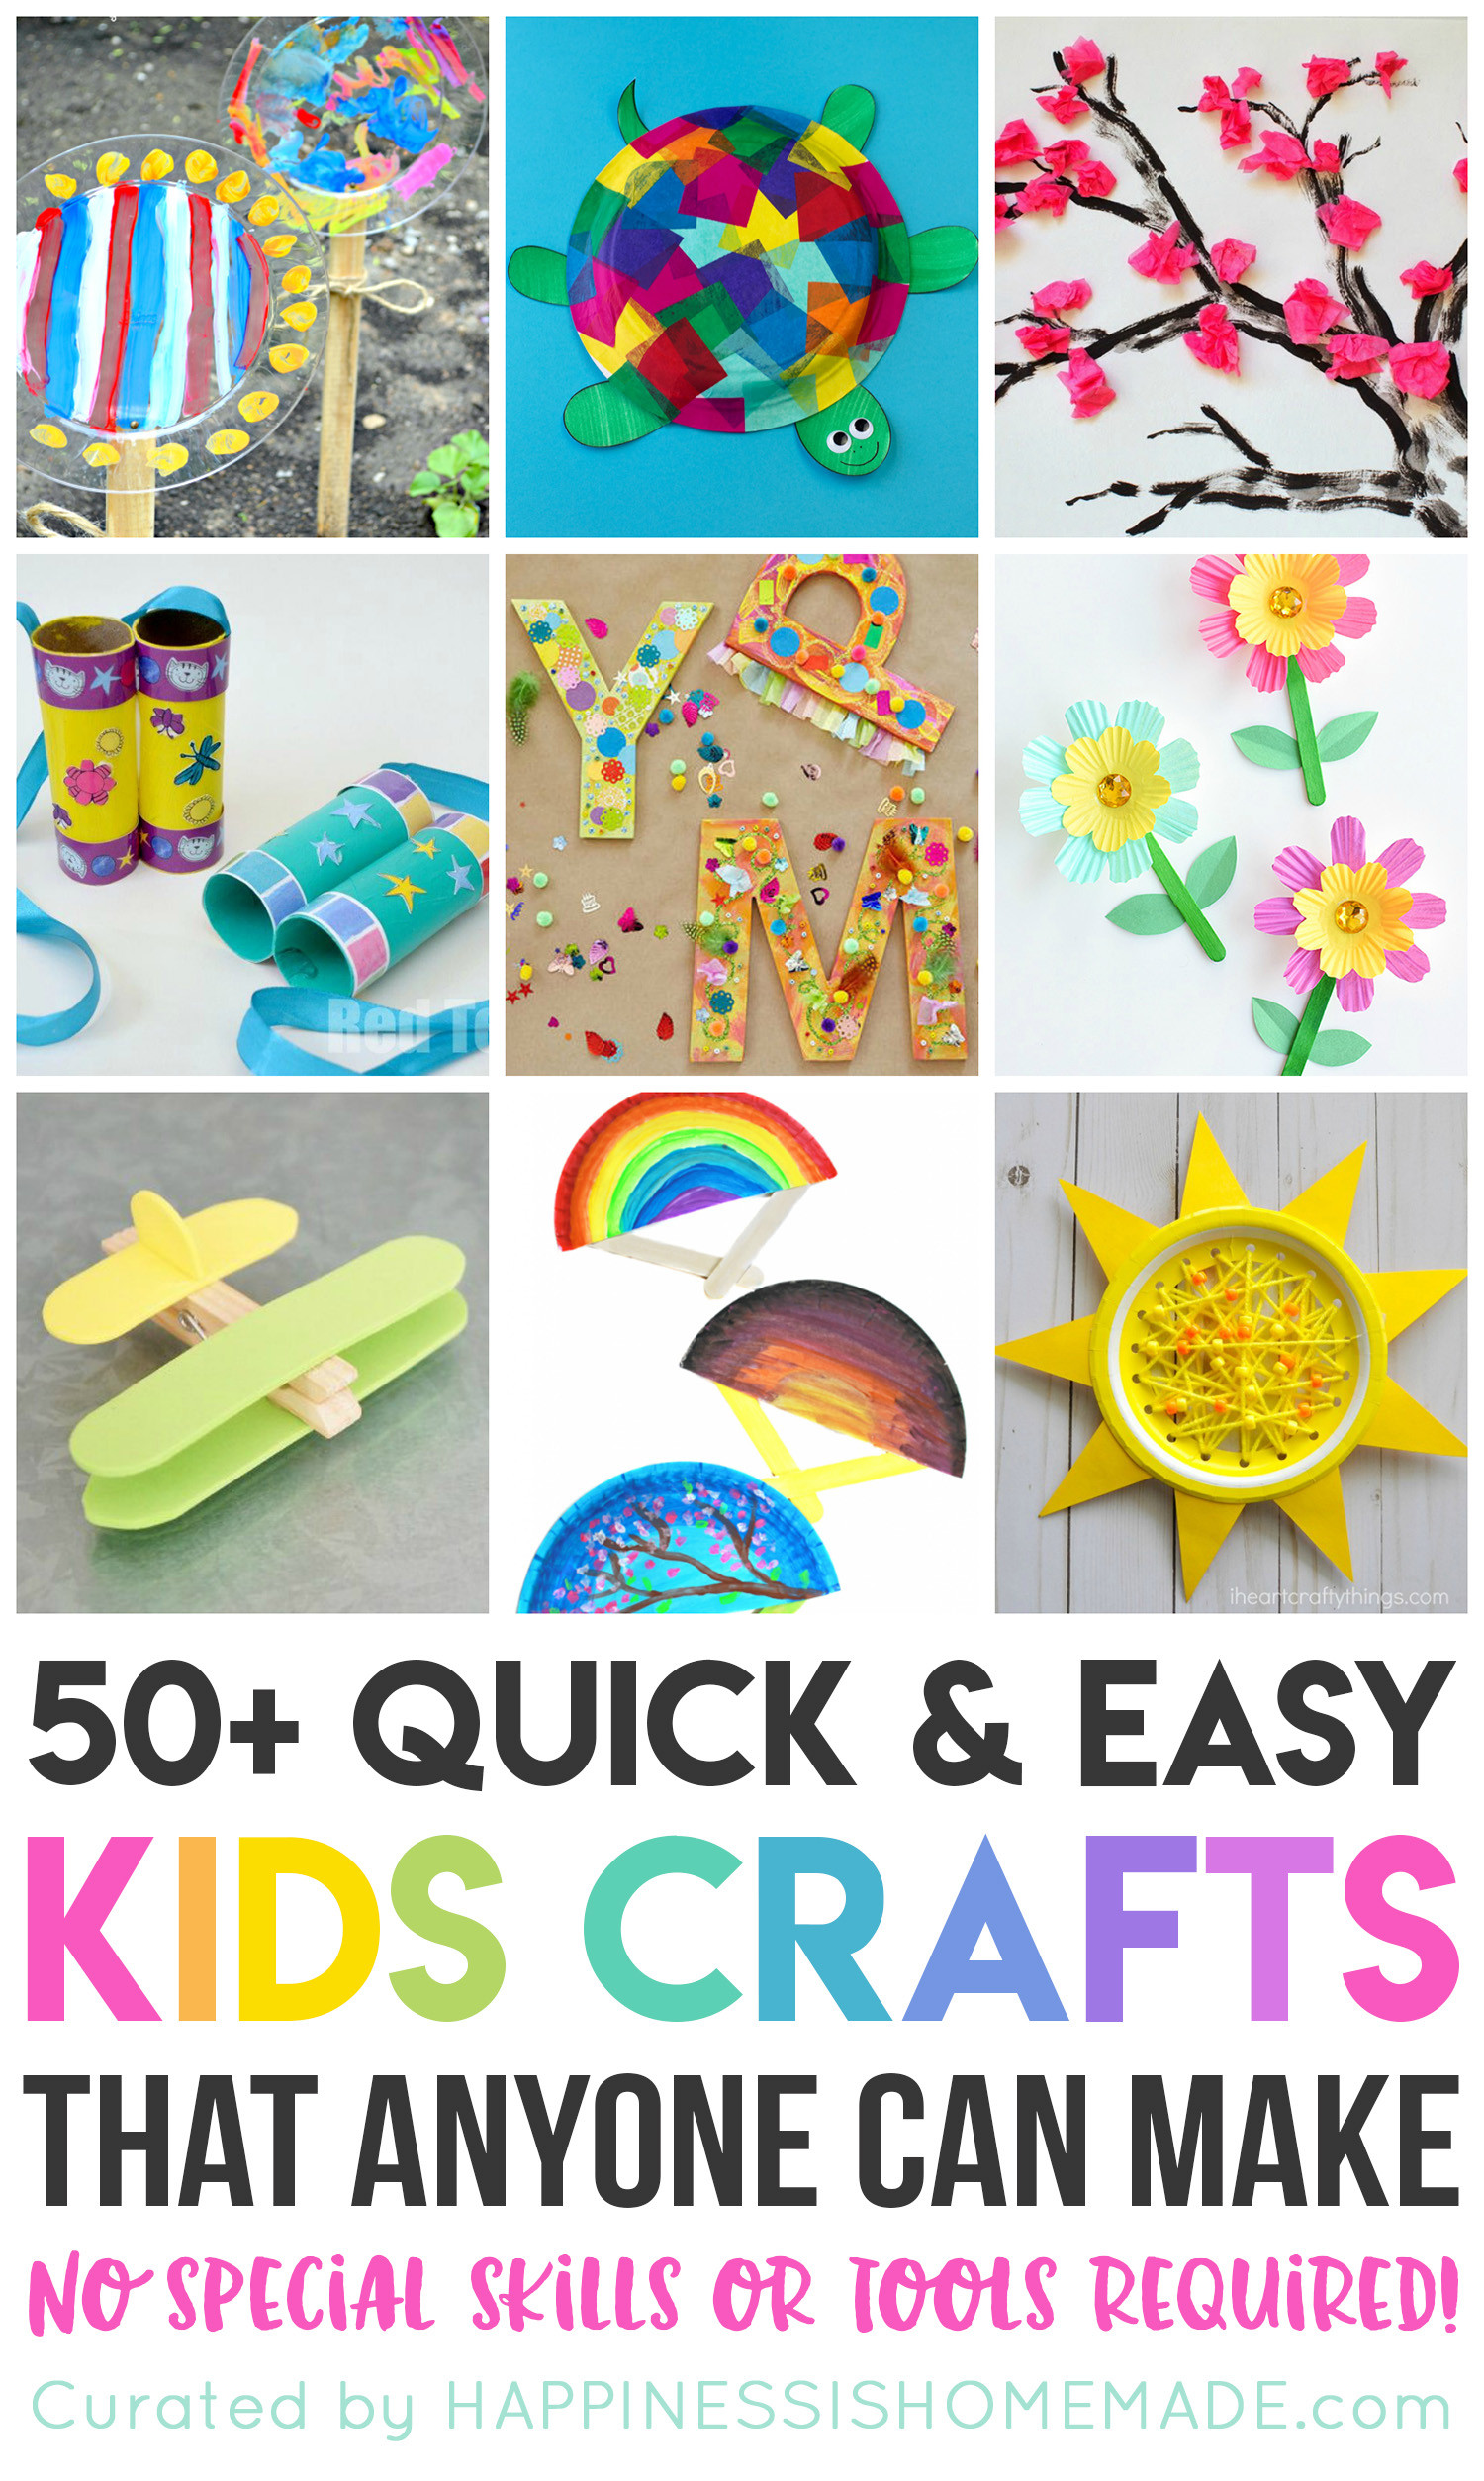 Easy Activities For Preschoolers
 50 Quick & Easy Kids Crafts that ANYONE Can Make